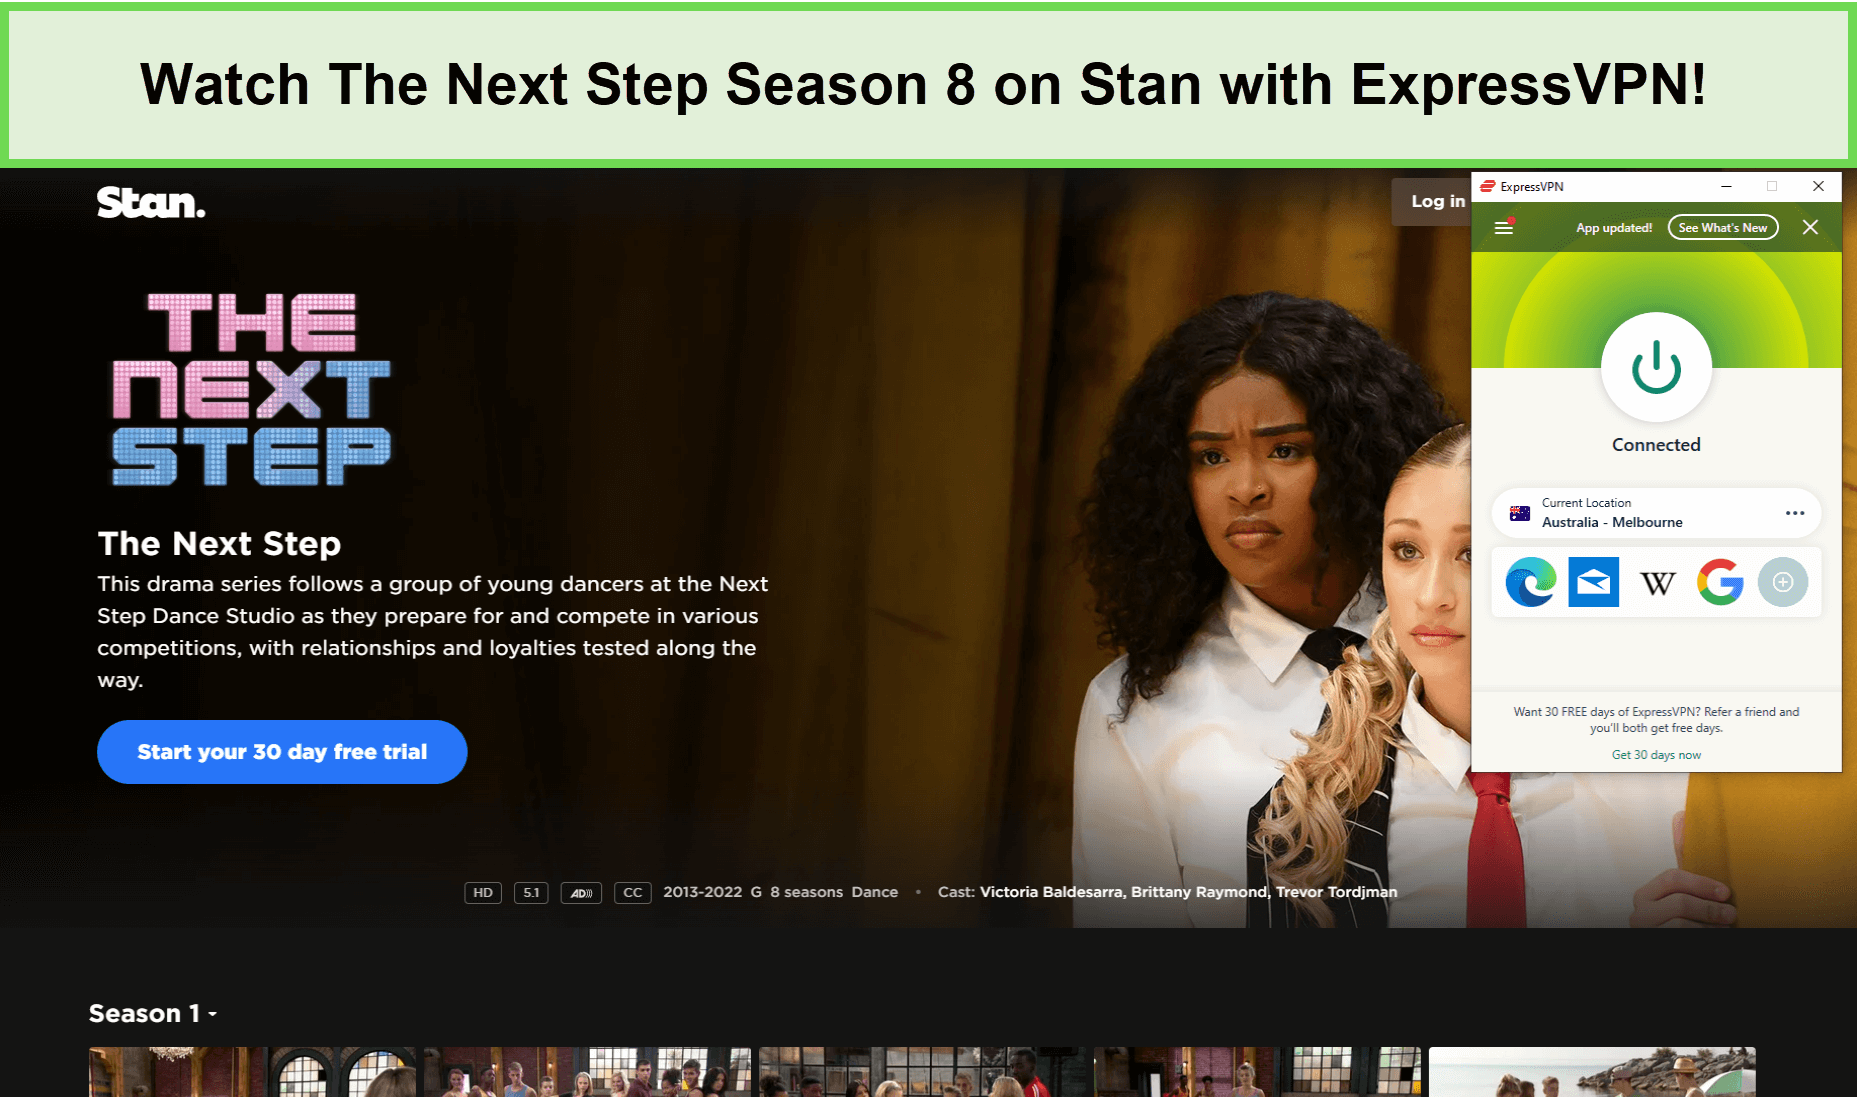 Watch-The-Next-Step-Season-8-in-Netherlands-on-Stan-with-ExpressVPN